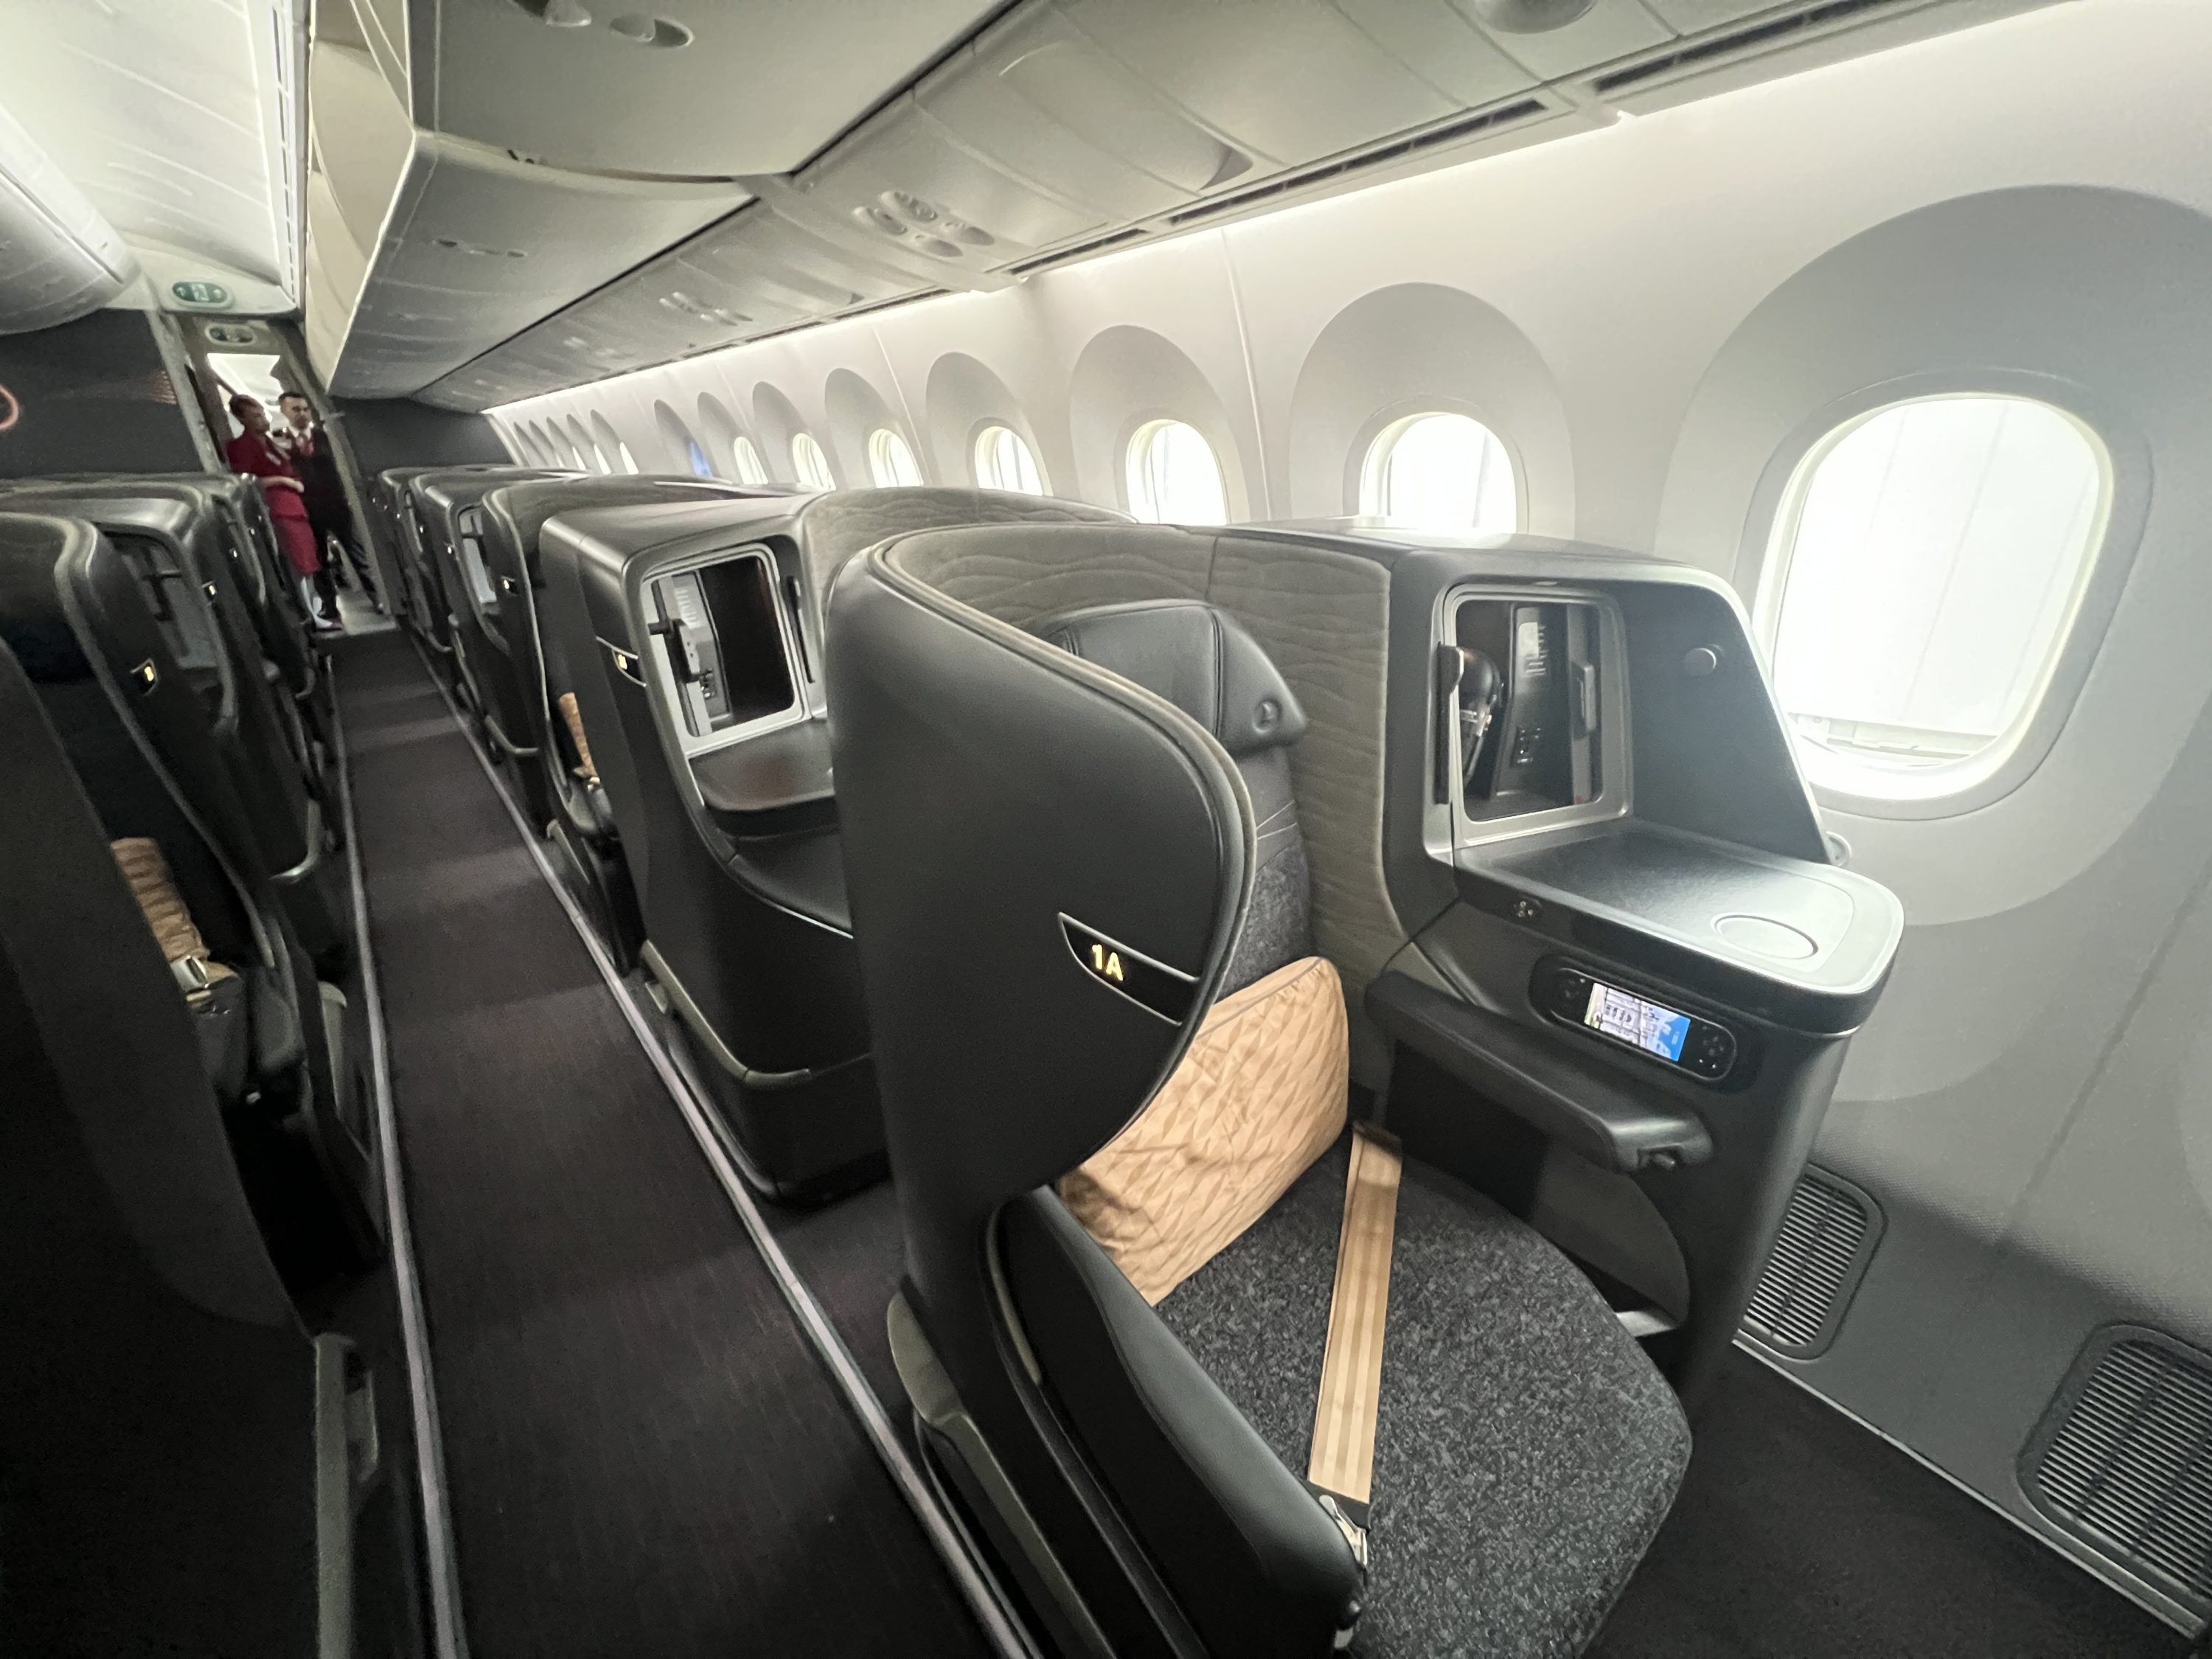 Turkish airlines business class cabin.